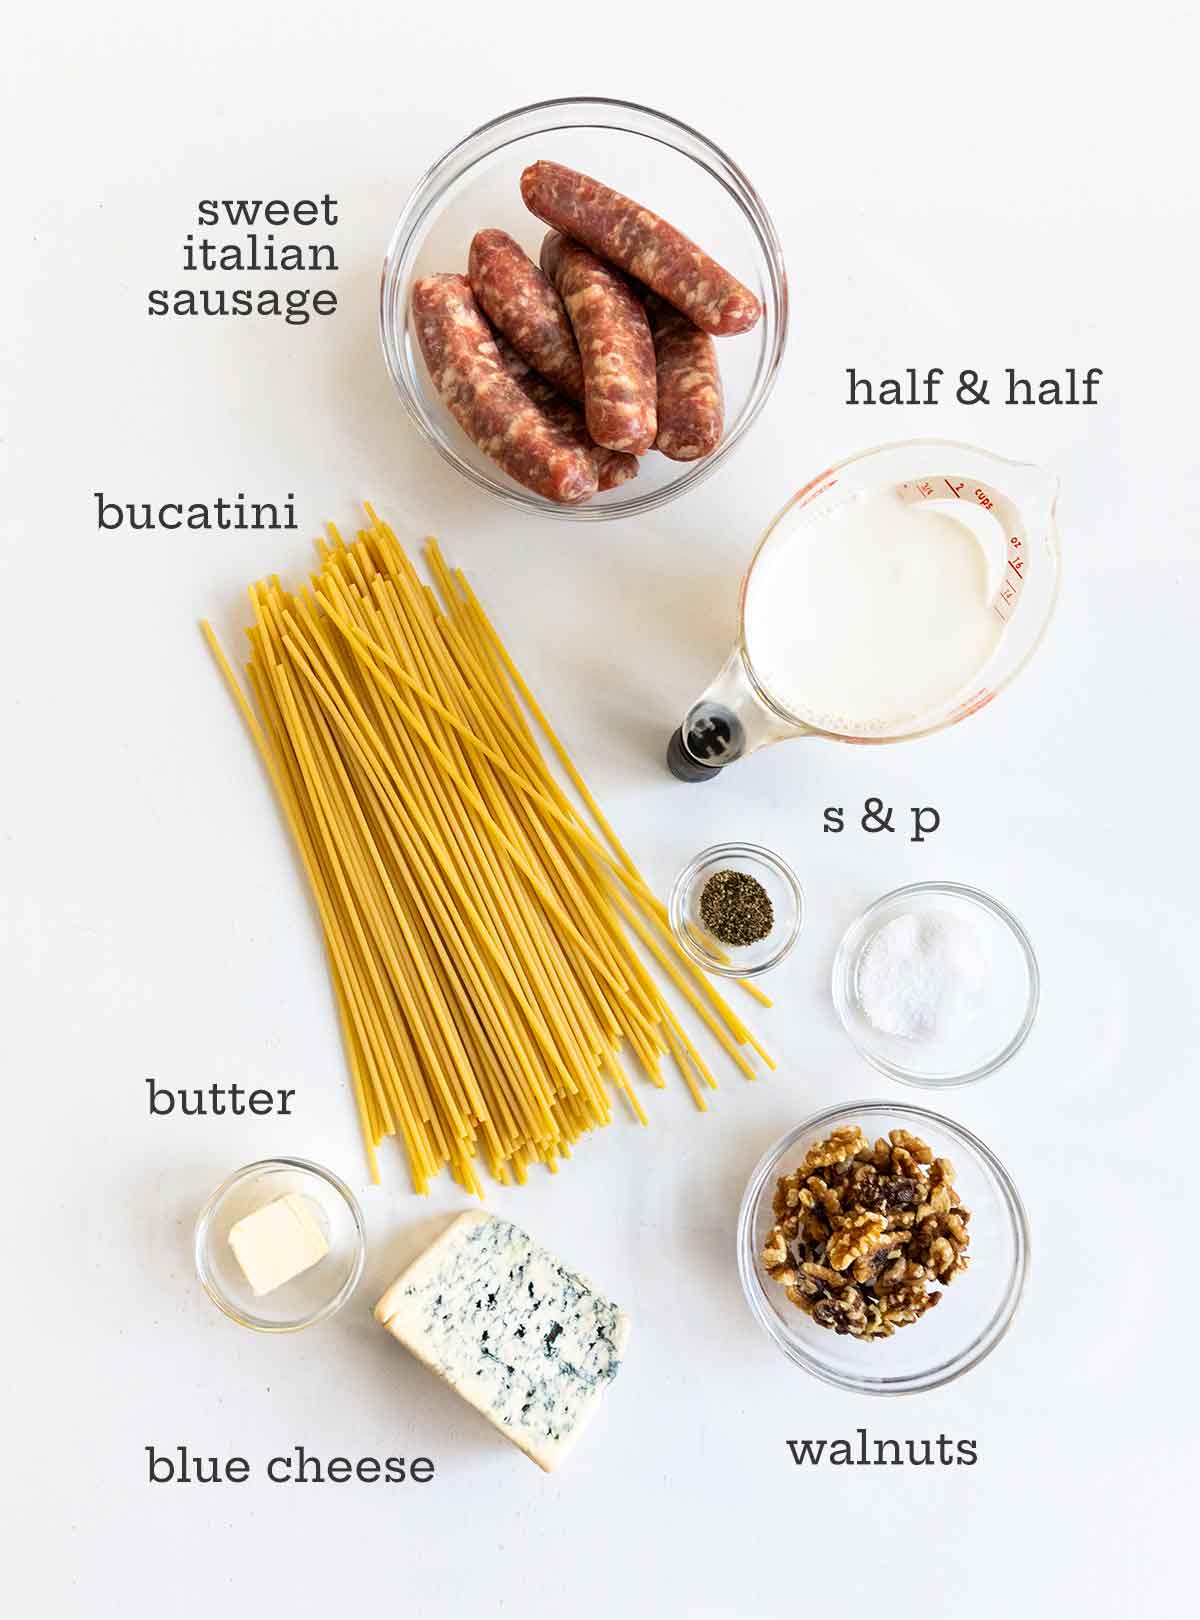 Blue cheese pasta ingredients: pasta, cheese, walnuts, half and half, sausage, and butter.